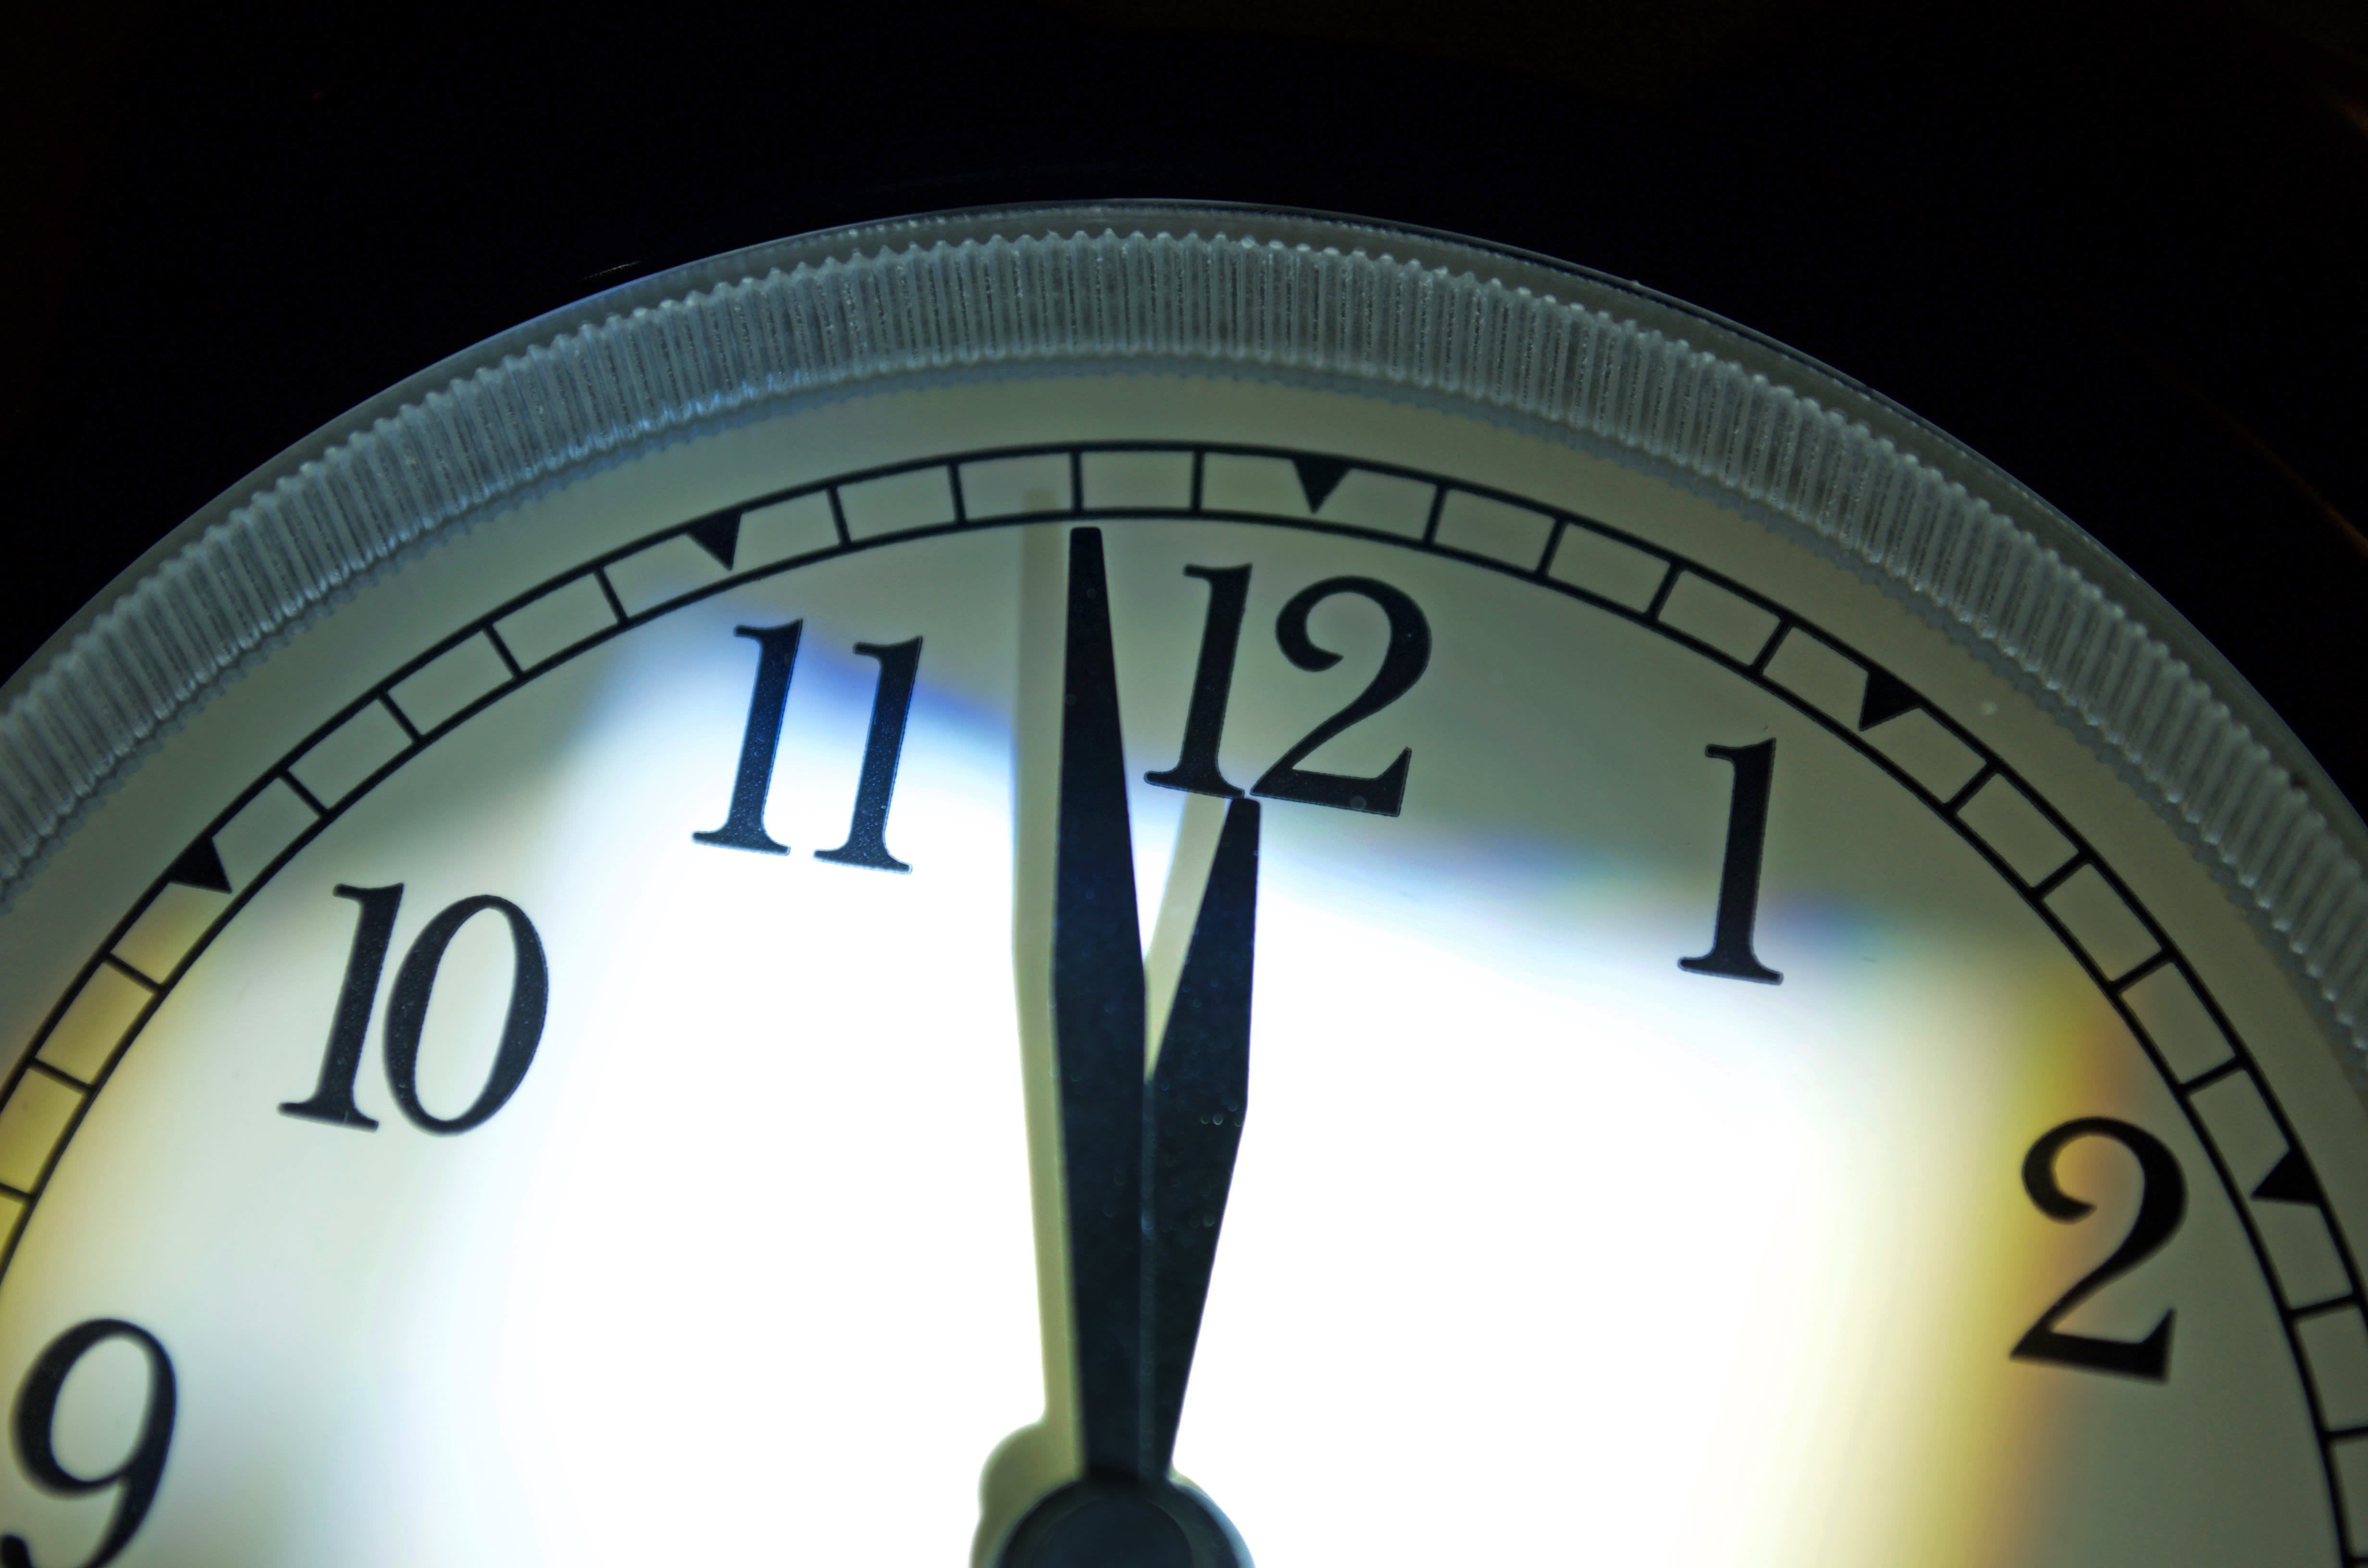 Mifid adds 20 minutes to client meetings